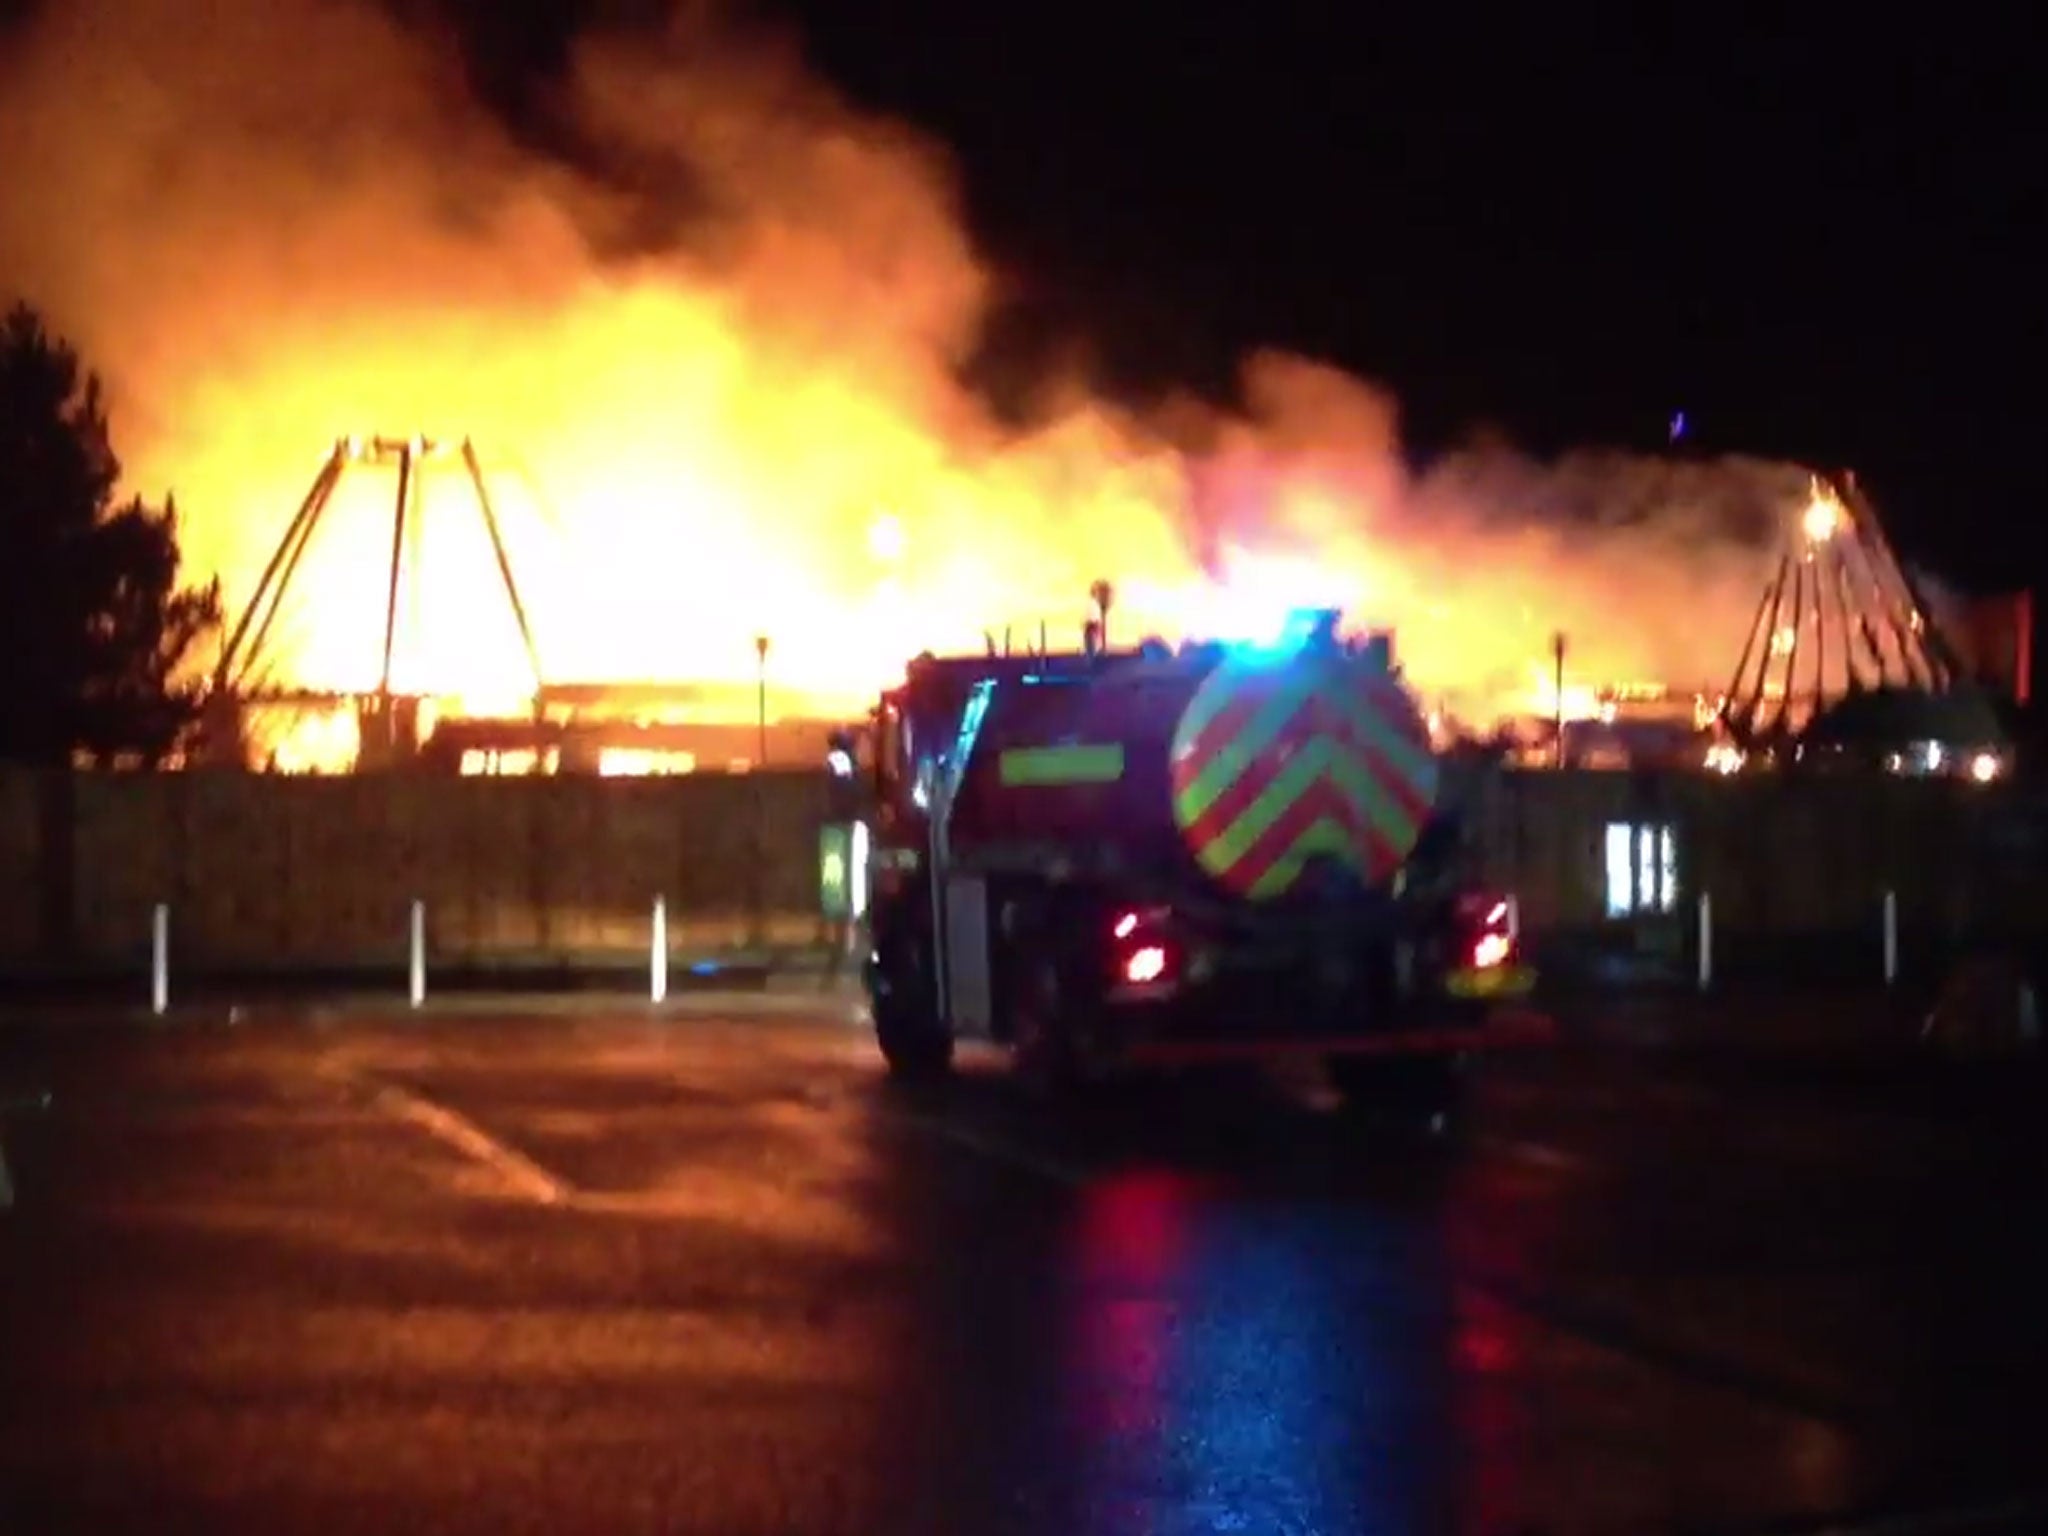 People evacuated from the nearby cinema watched on as fire crews tackled the Red Hot blaze